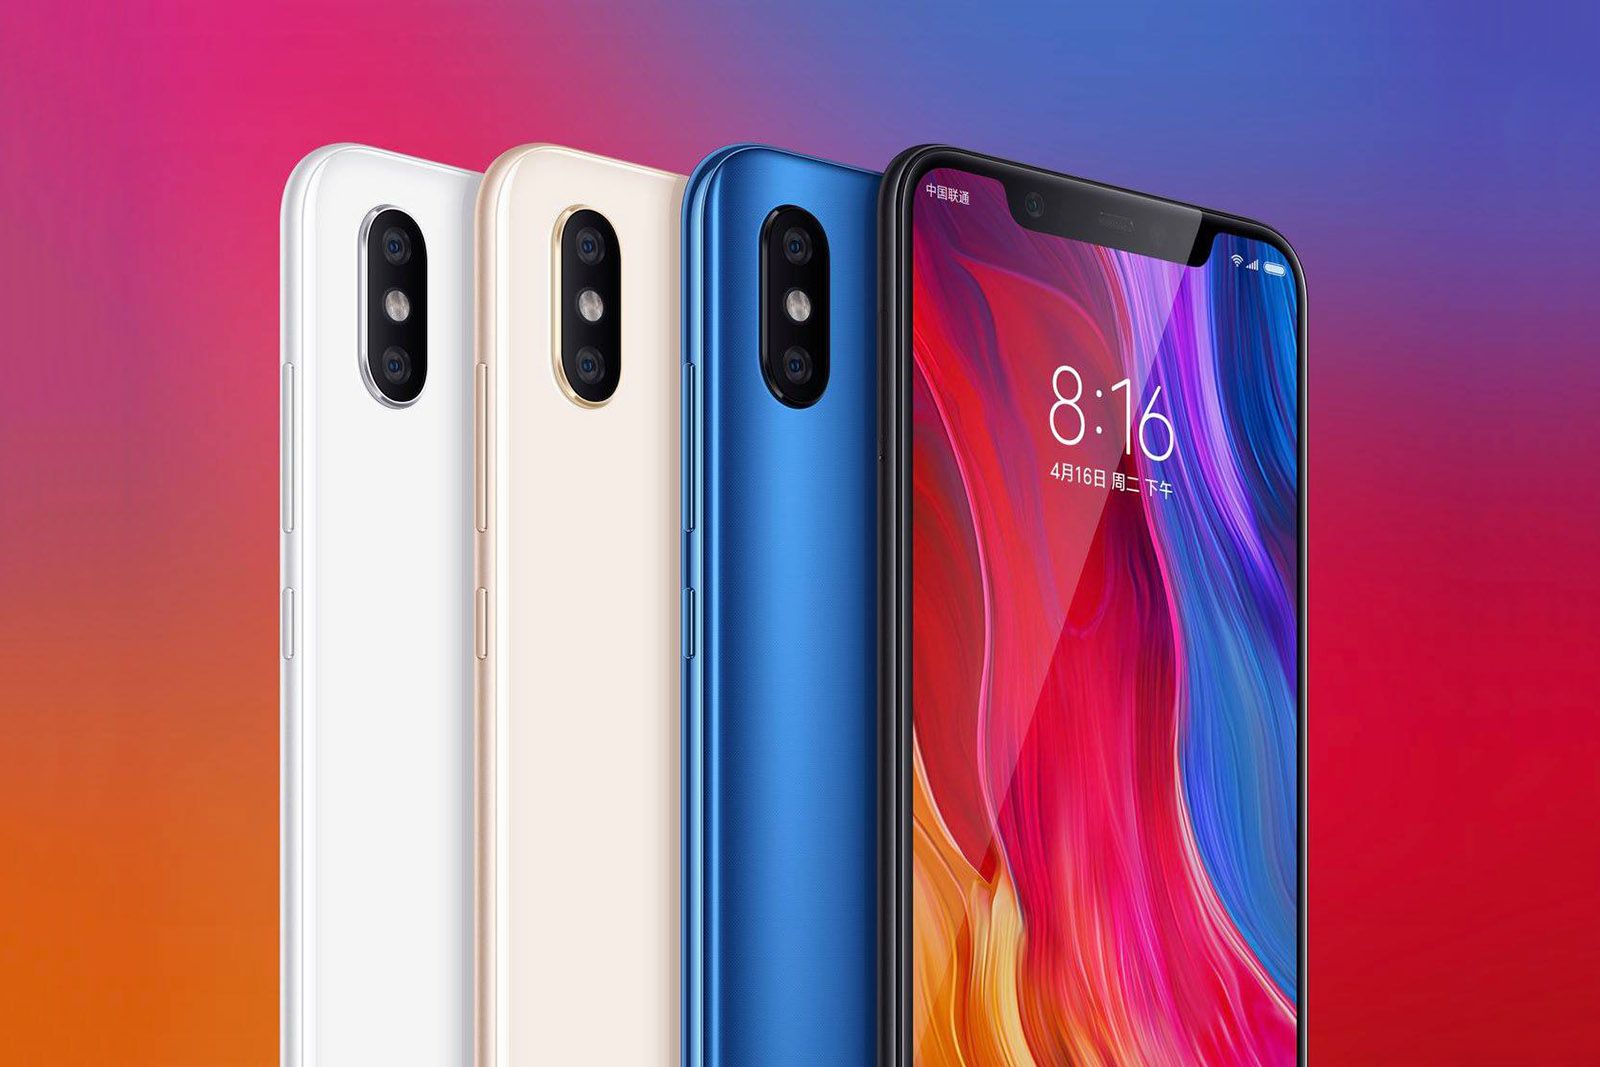 Xiaomi Mi 8 is a 61-inch monster with iPhone X looks and dual-frequency GPS image 1